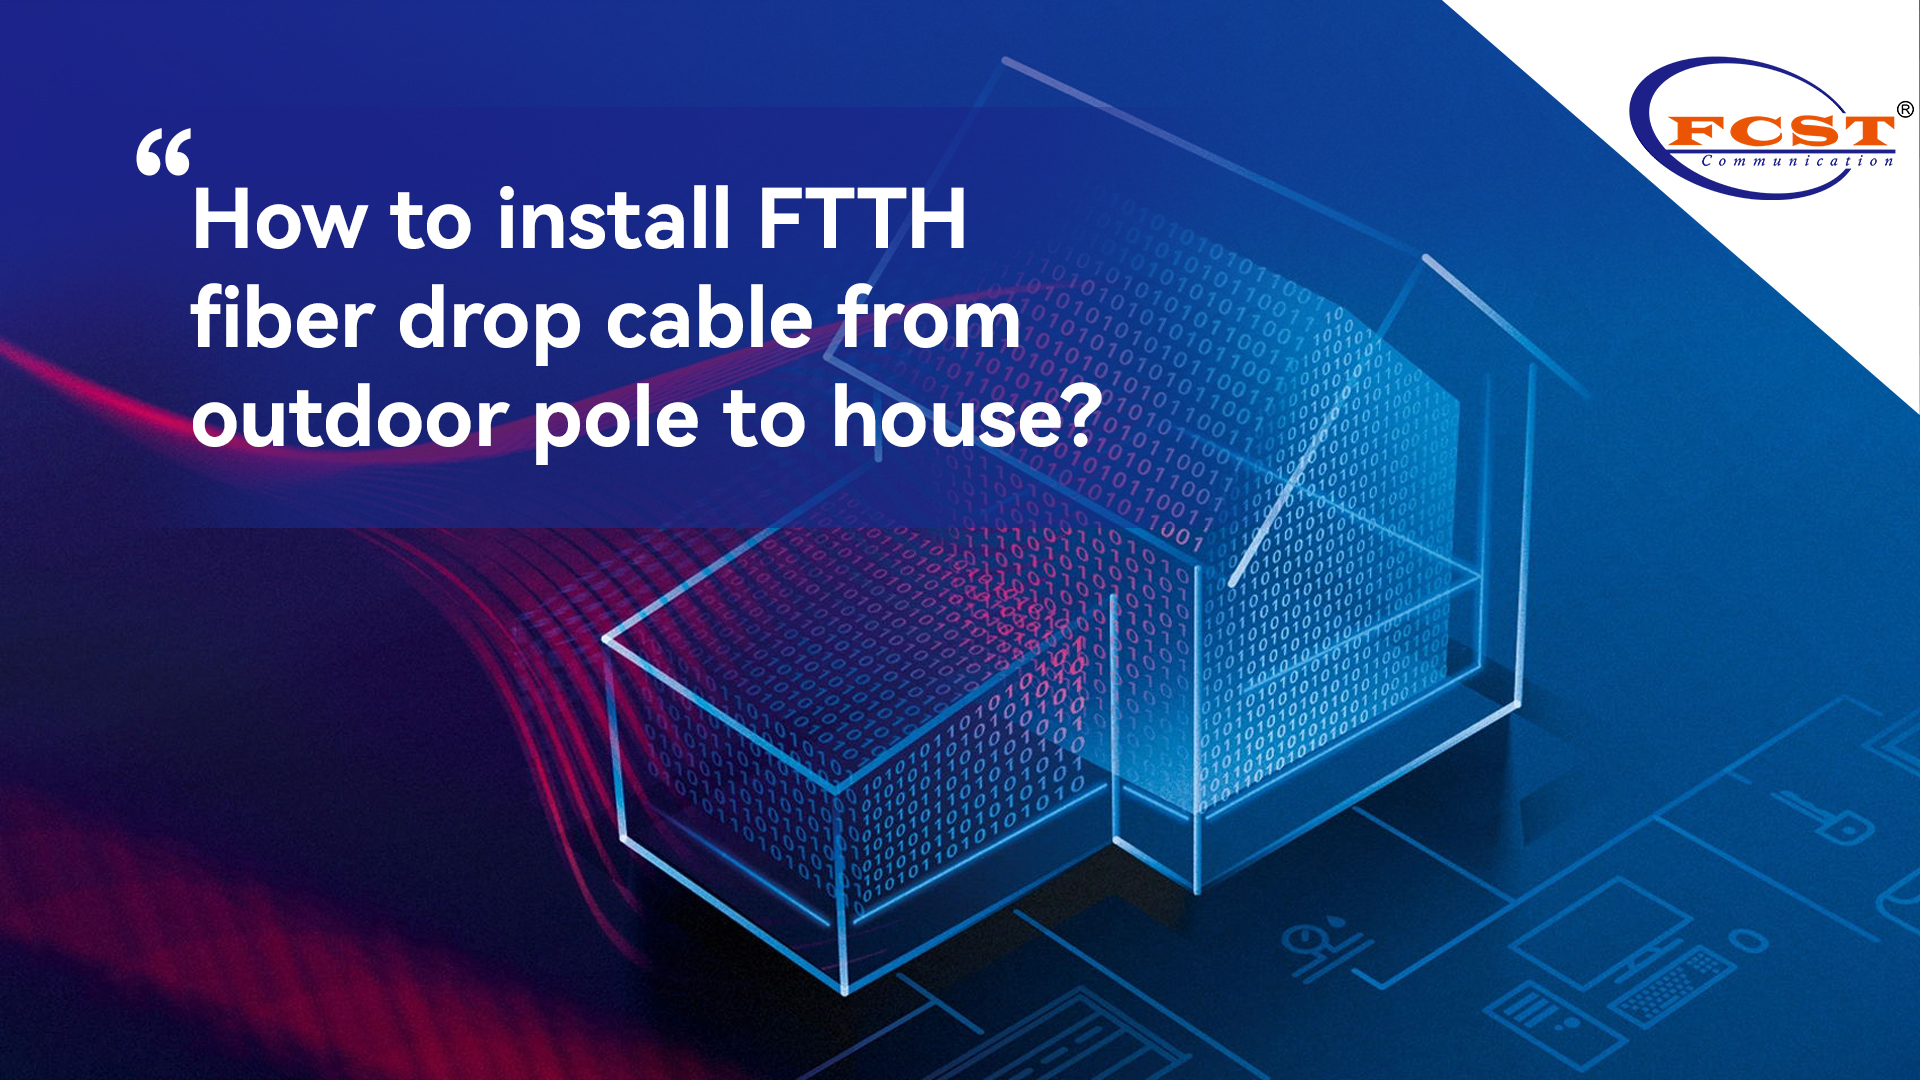 How to install FTTH fiber drop cable from outdoor pole to house?